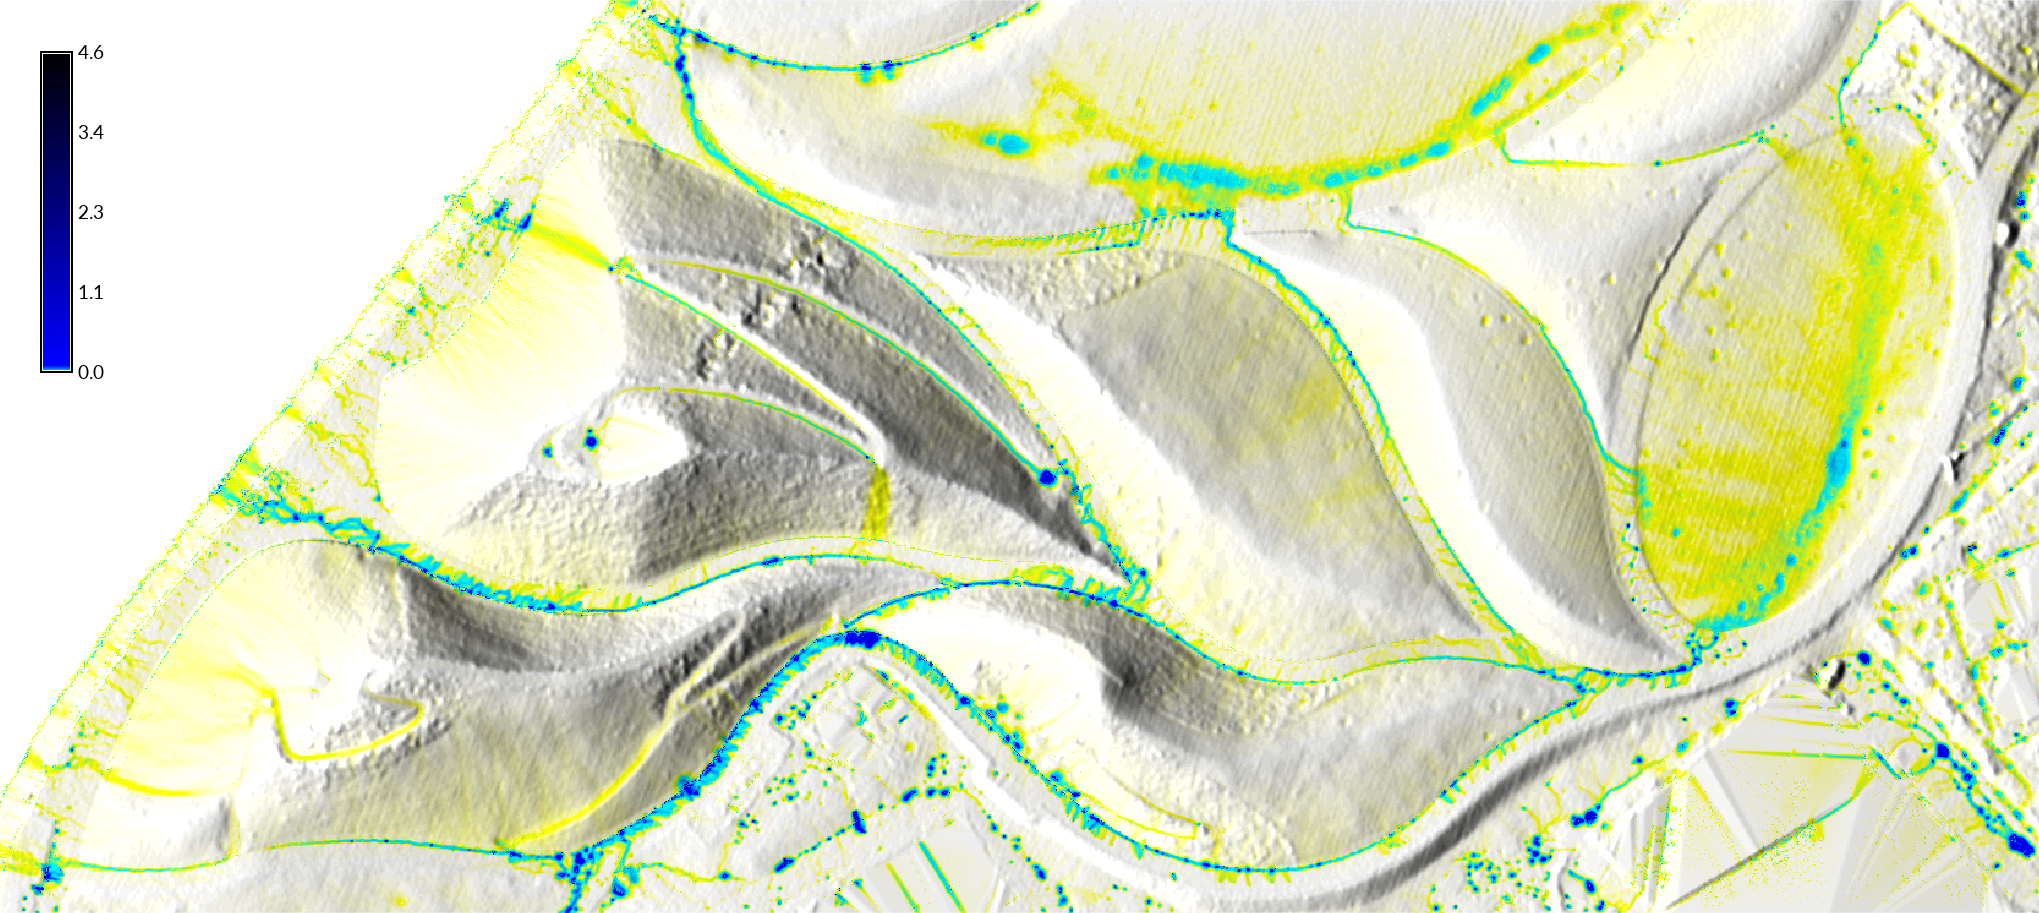 Shallow water flow discharge with landcover from NDVI